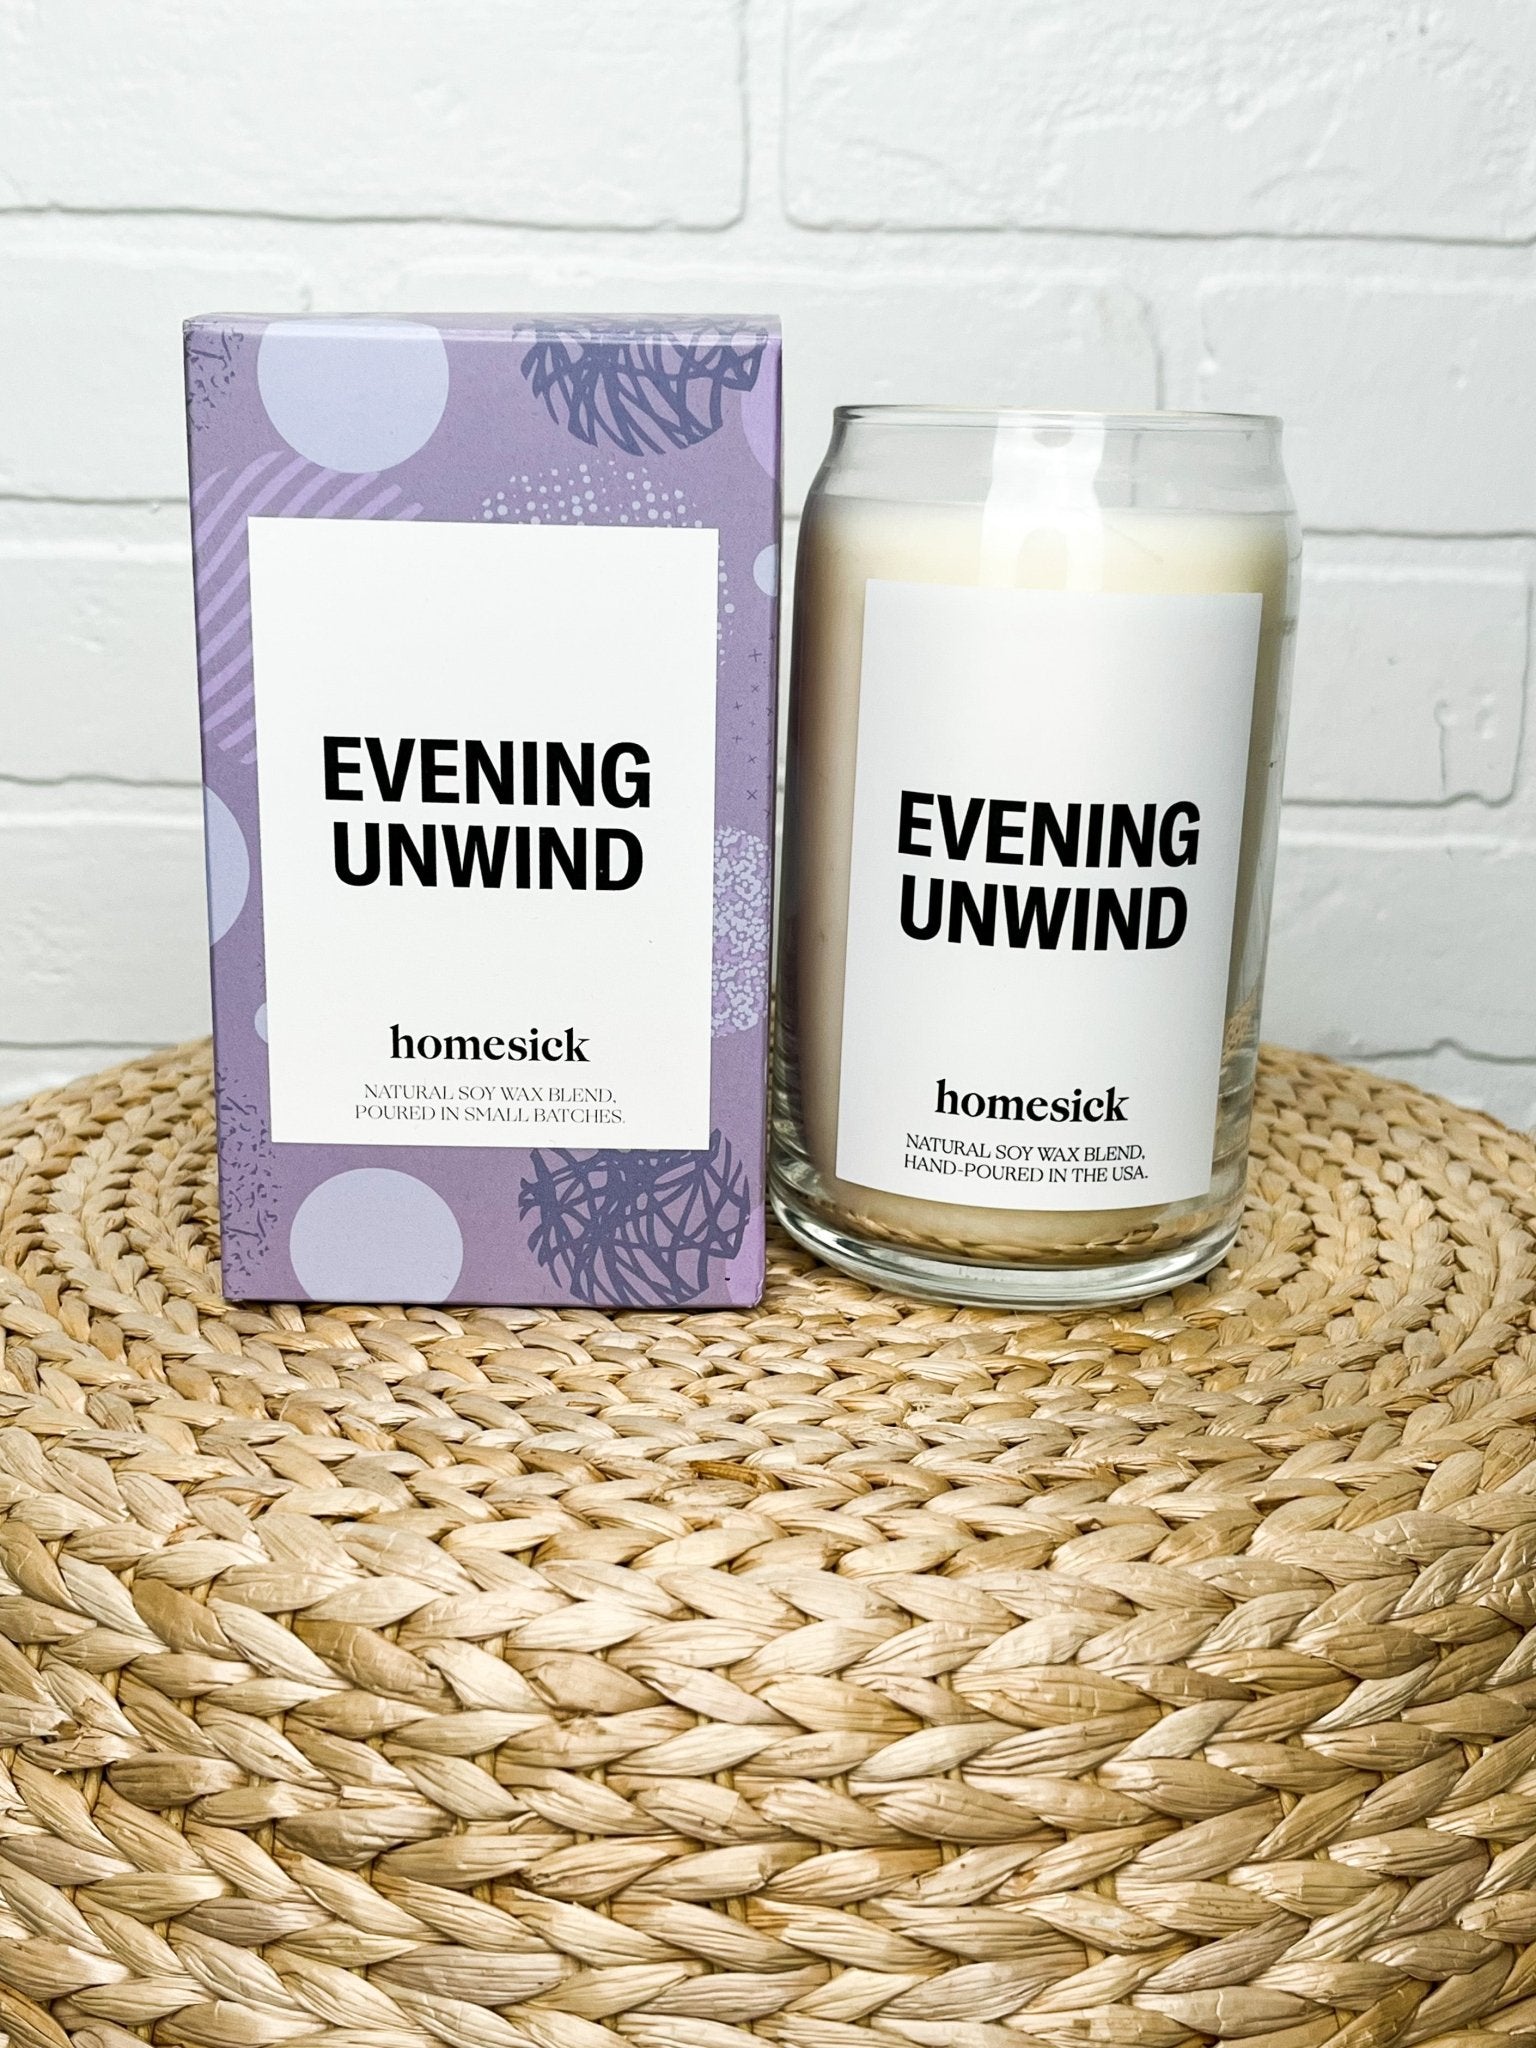 Homesick Evening Unwind candle - Trendy Candles at Lush Fashion Lounge Boutique in Oklahoma City